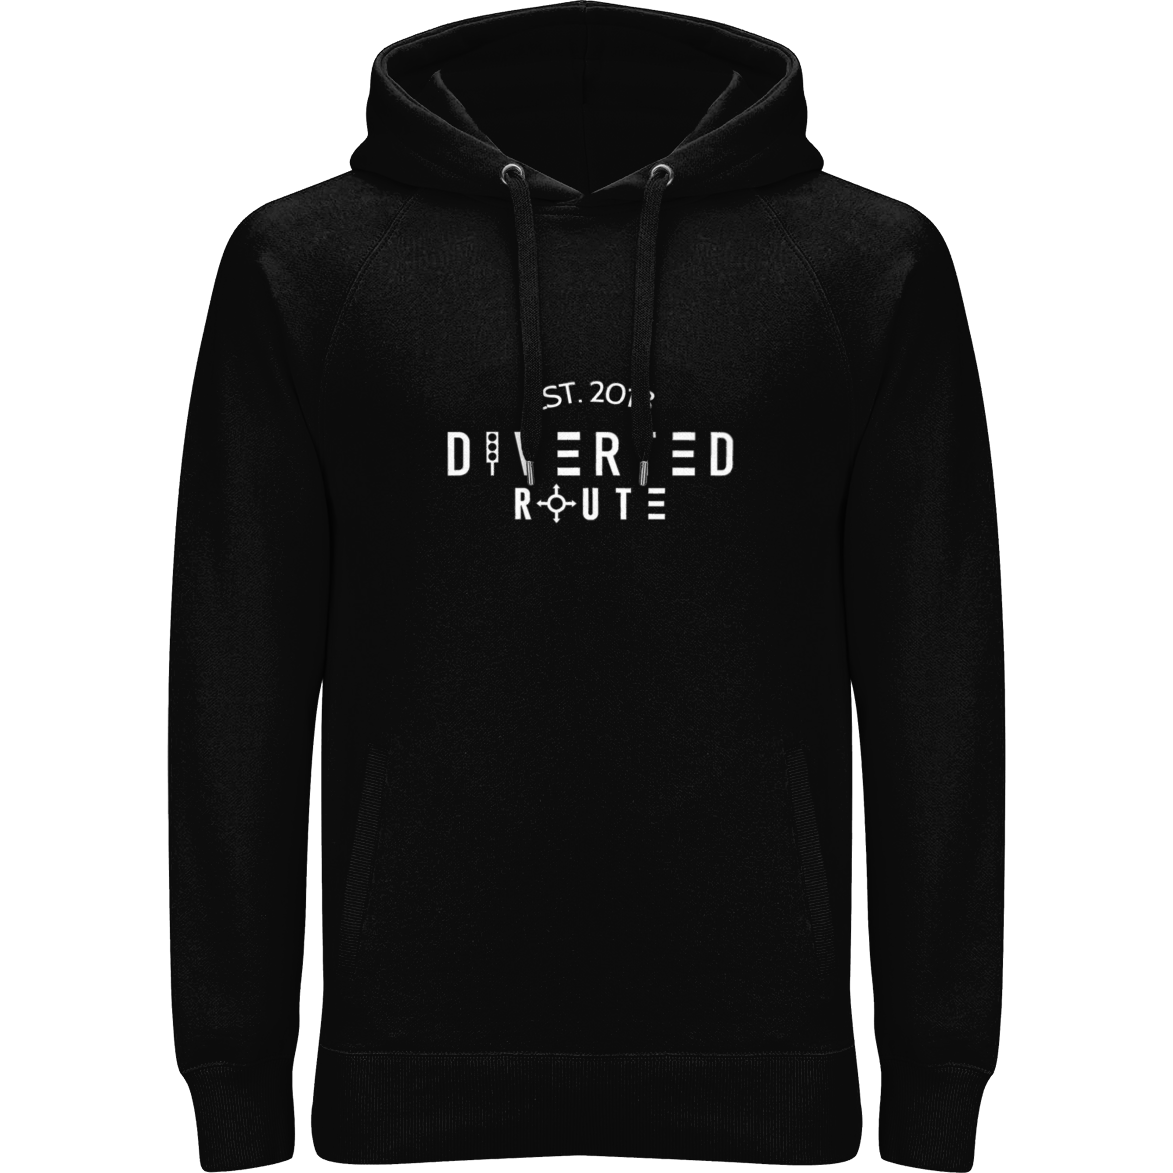 Diverted Route Right Path Hoody-Diverted Route